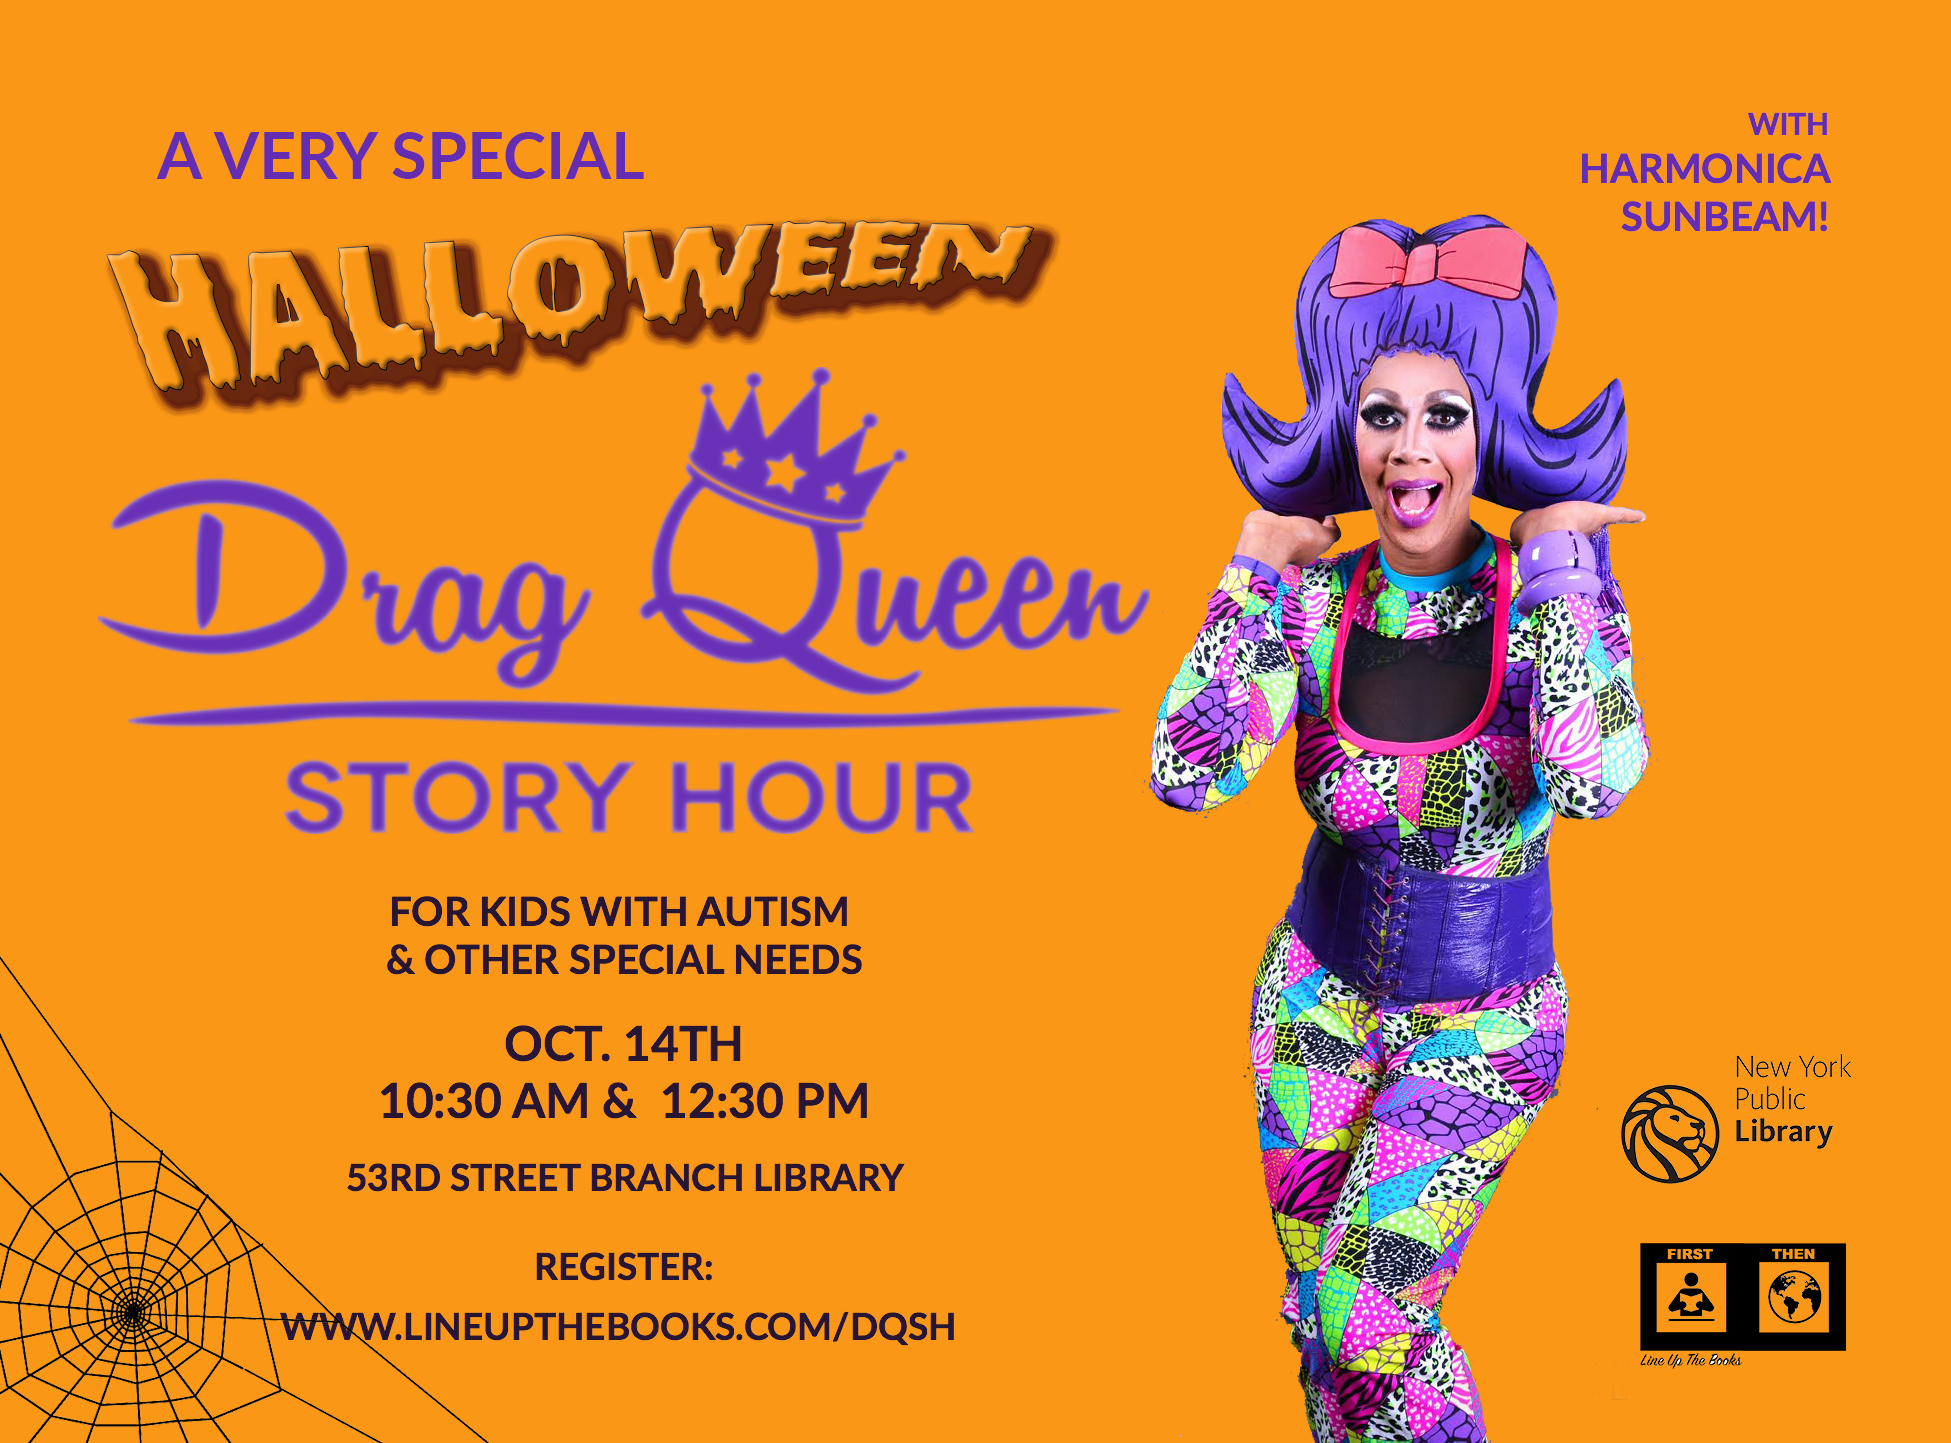 Presenting... Drag Queen Story Hour for Kids with Autism!